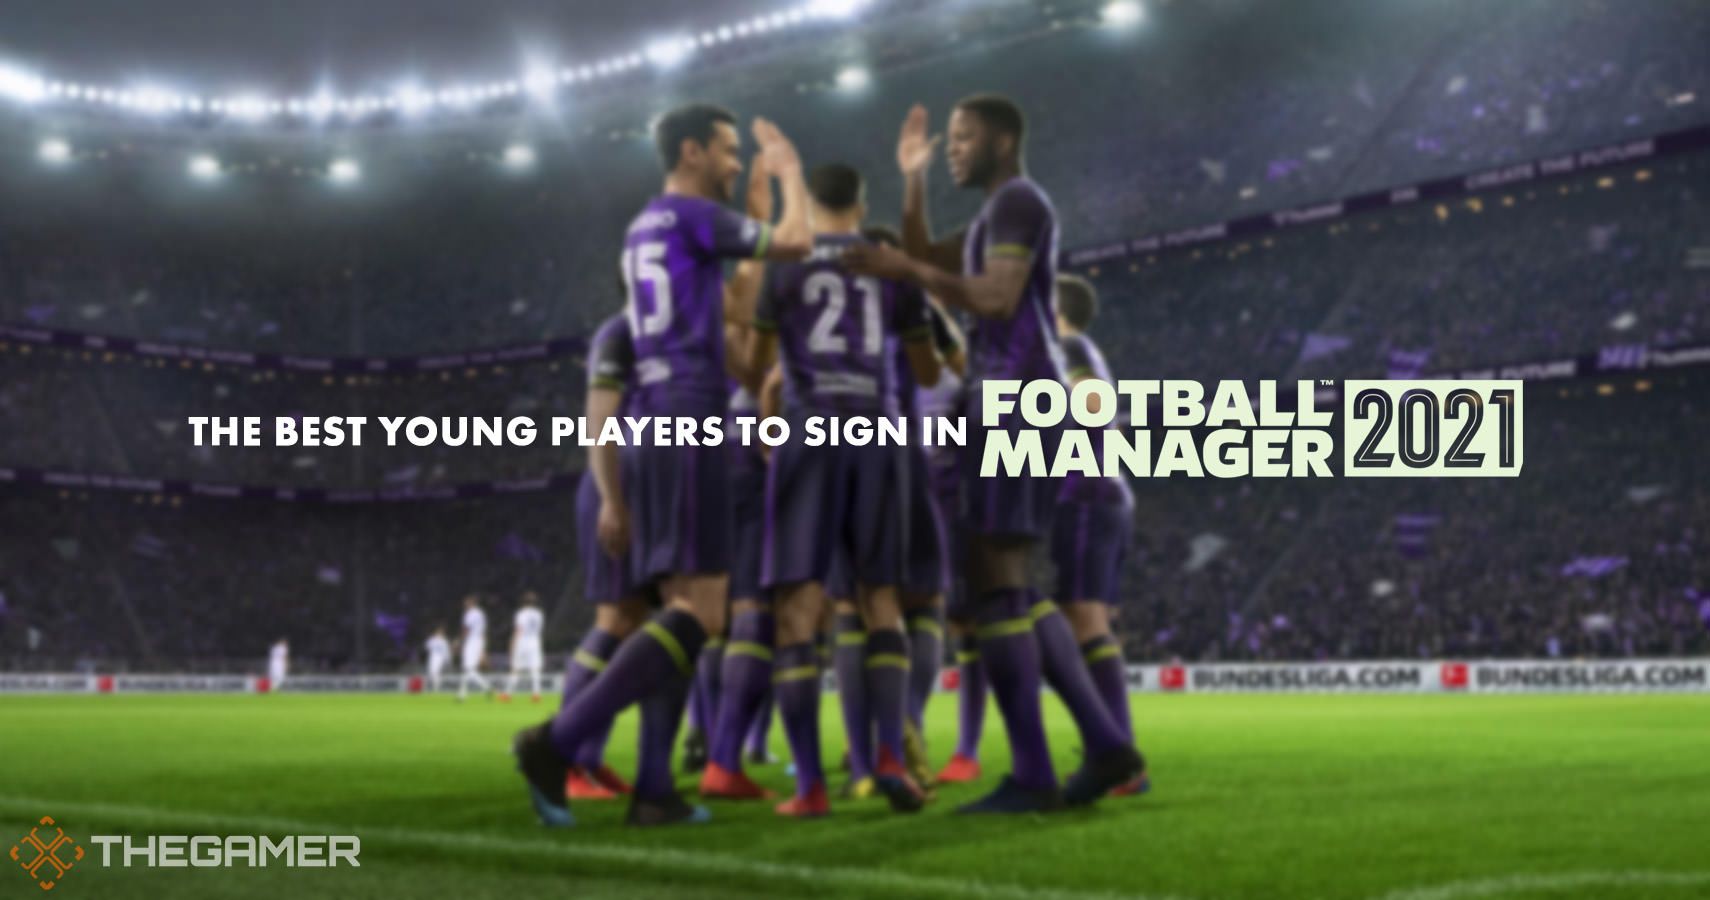 The Best Young Players To Sign In Football Manager 2021